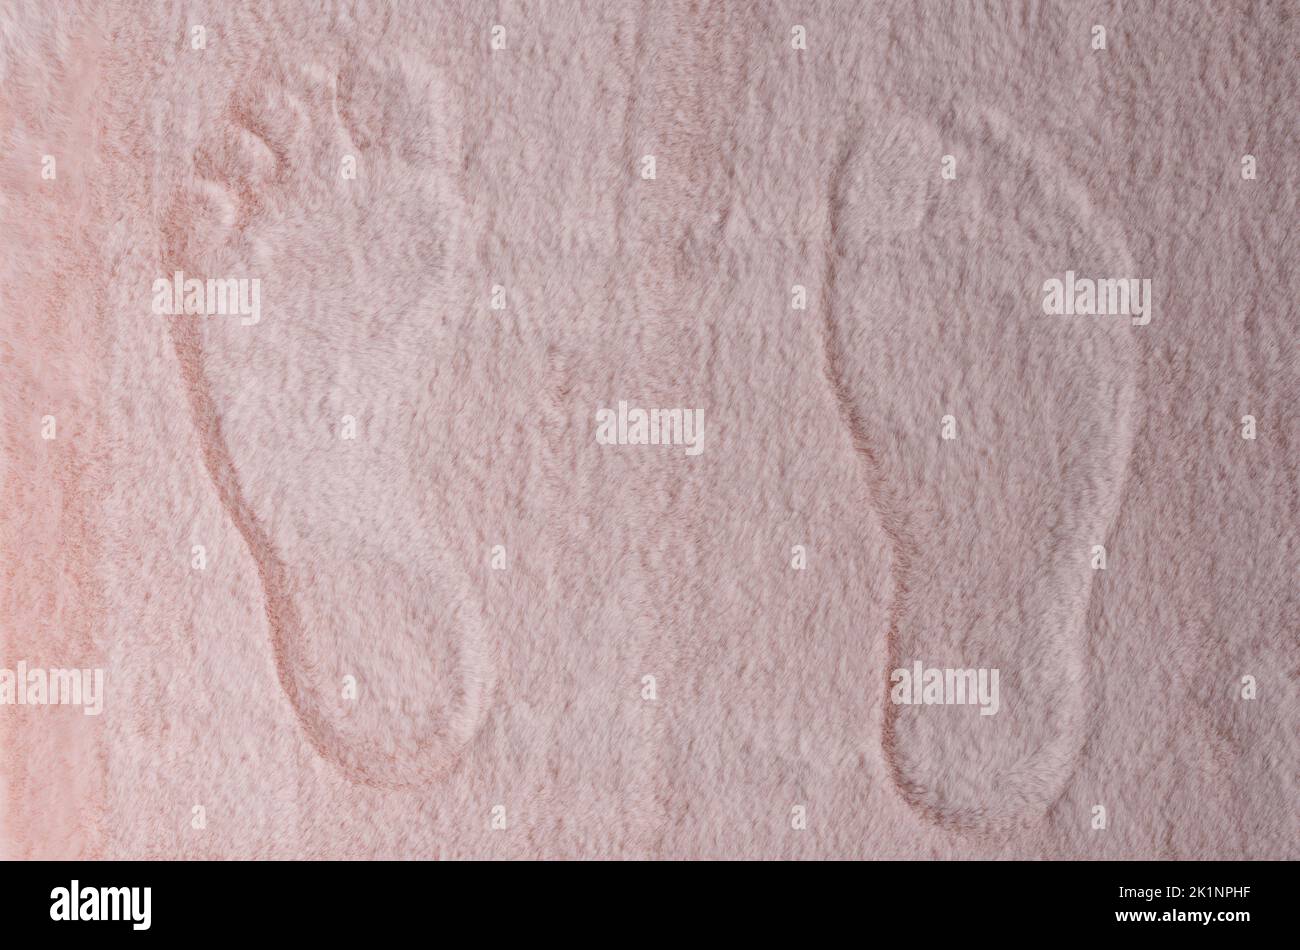 Pair of barefoot trace on pink soft fluffy carpet above top view Stock Photo